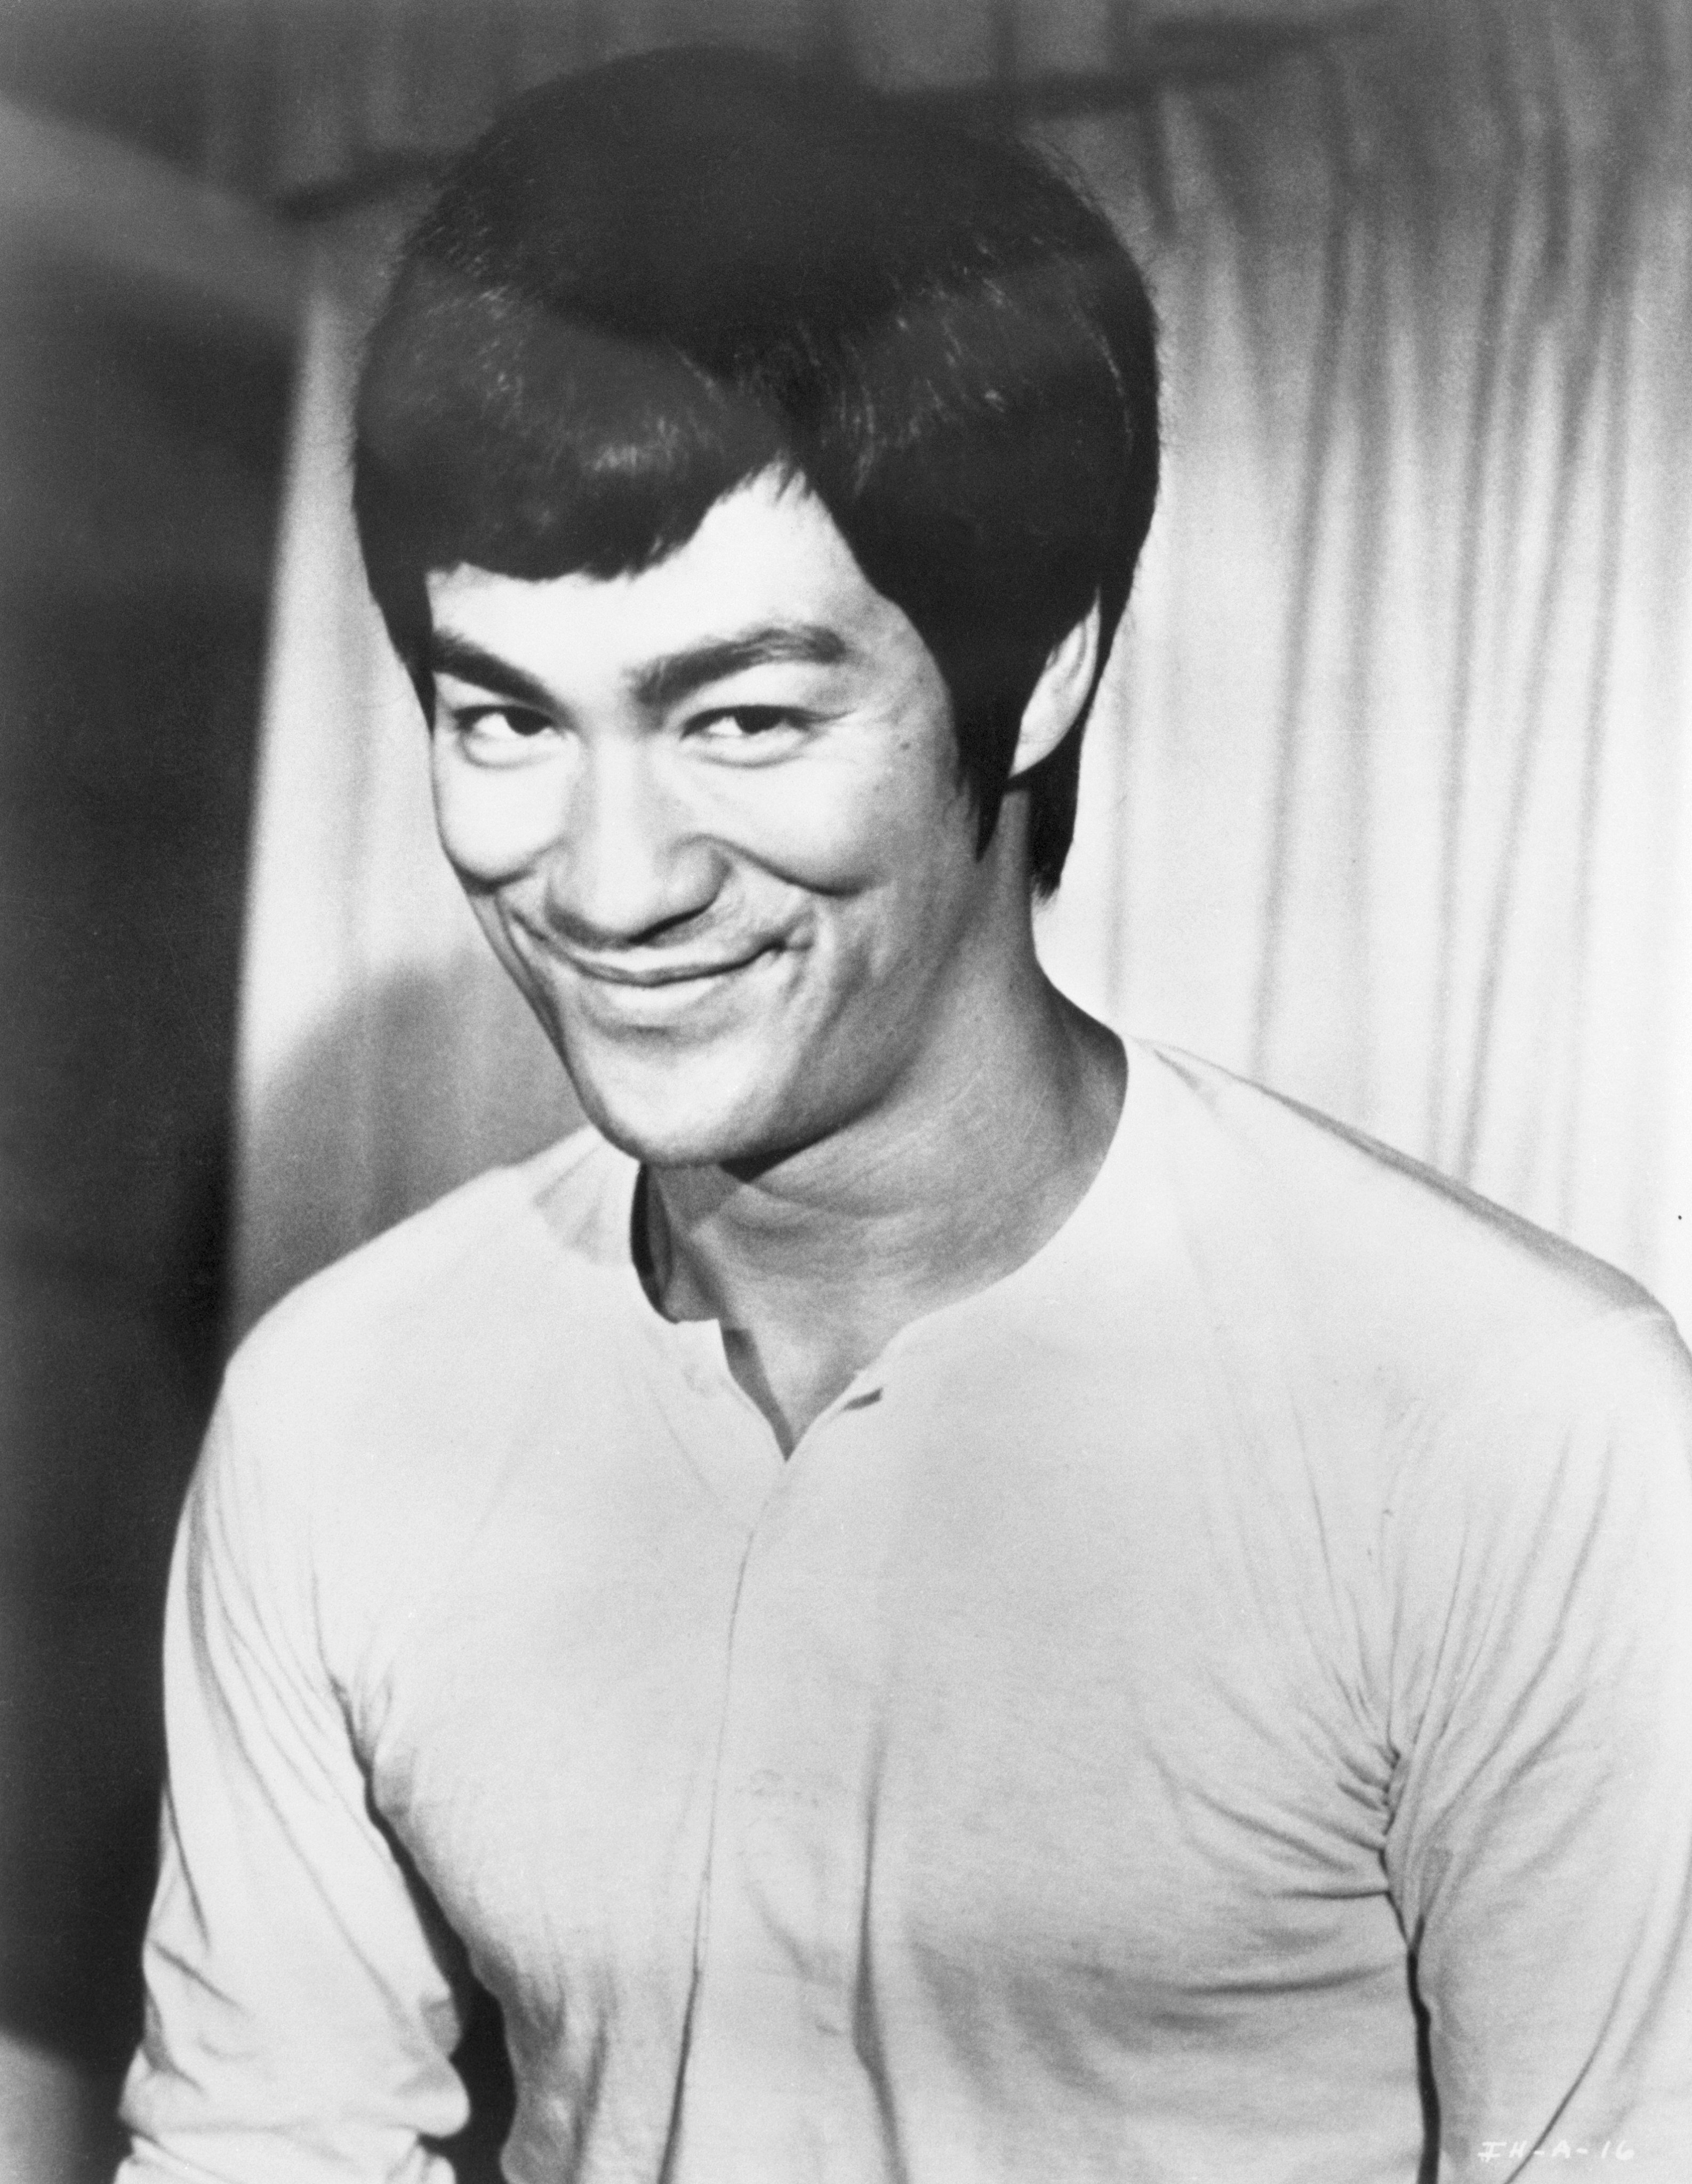 Recently found letters between Bruce Lee, his wife and a co-star mention illegal drugs, sparking new conspiracy theories about the martial arts legend.